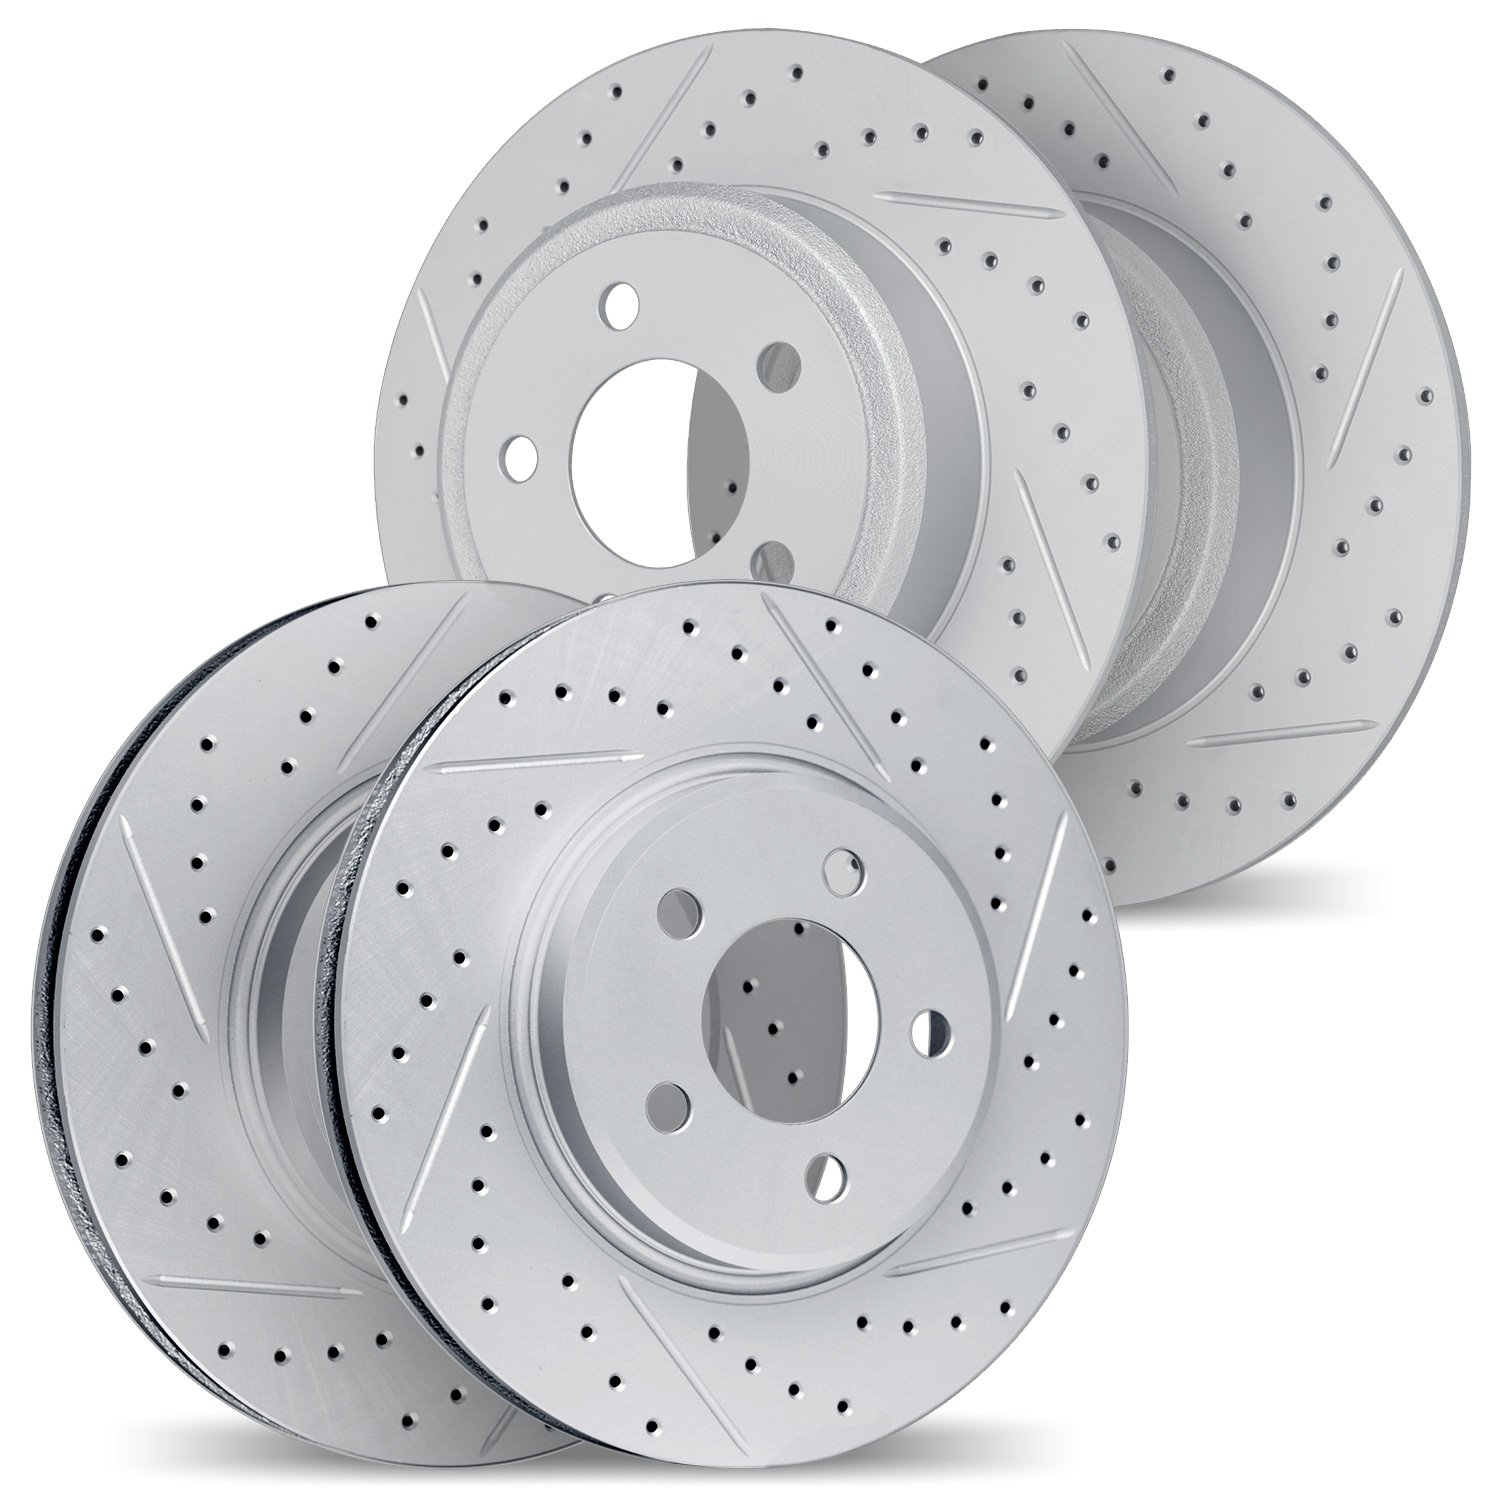 2004-59067 Geoperformance Drilled/Slotted Brake Rotors, 2015-2017 Acura/Honda, Position: Front and Rear